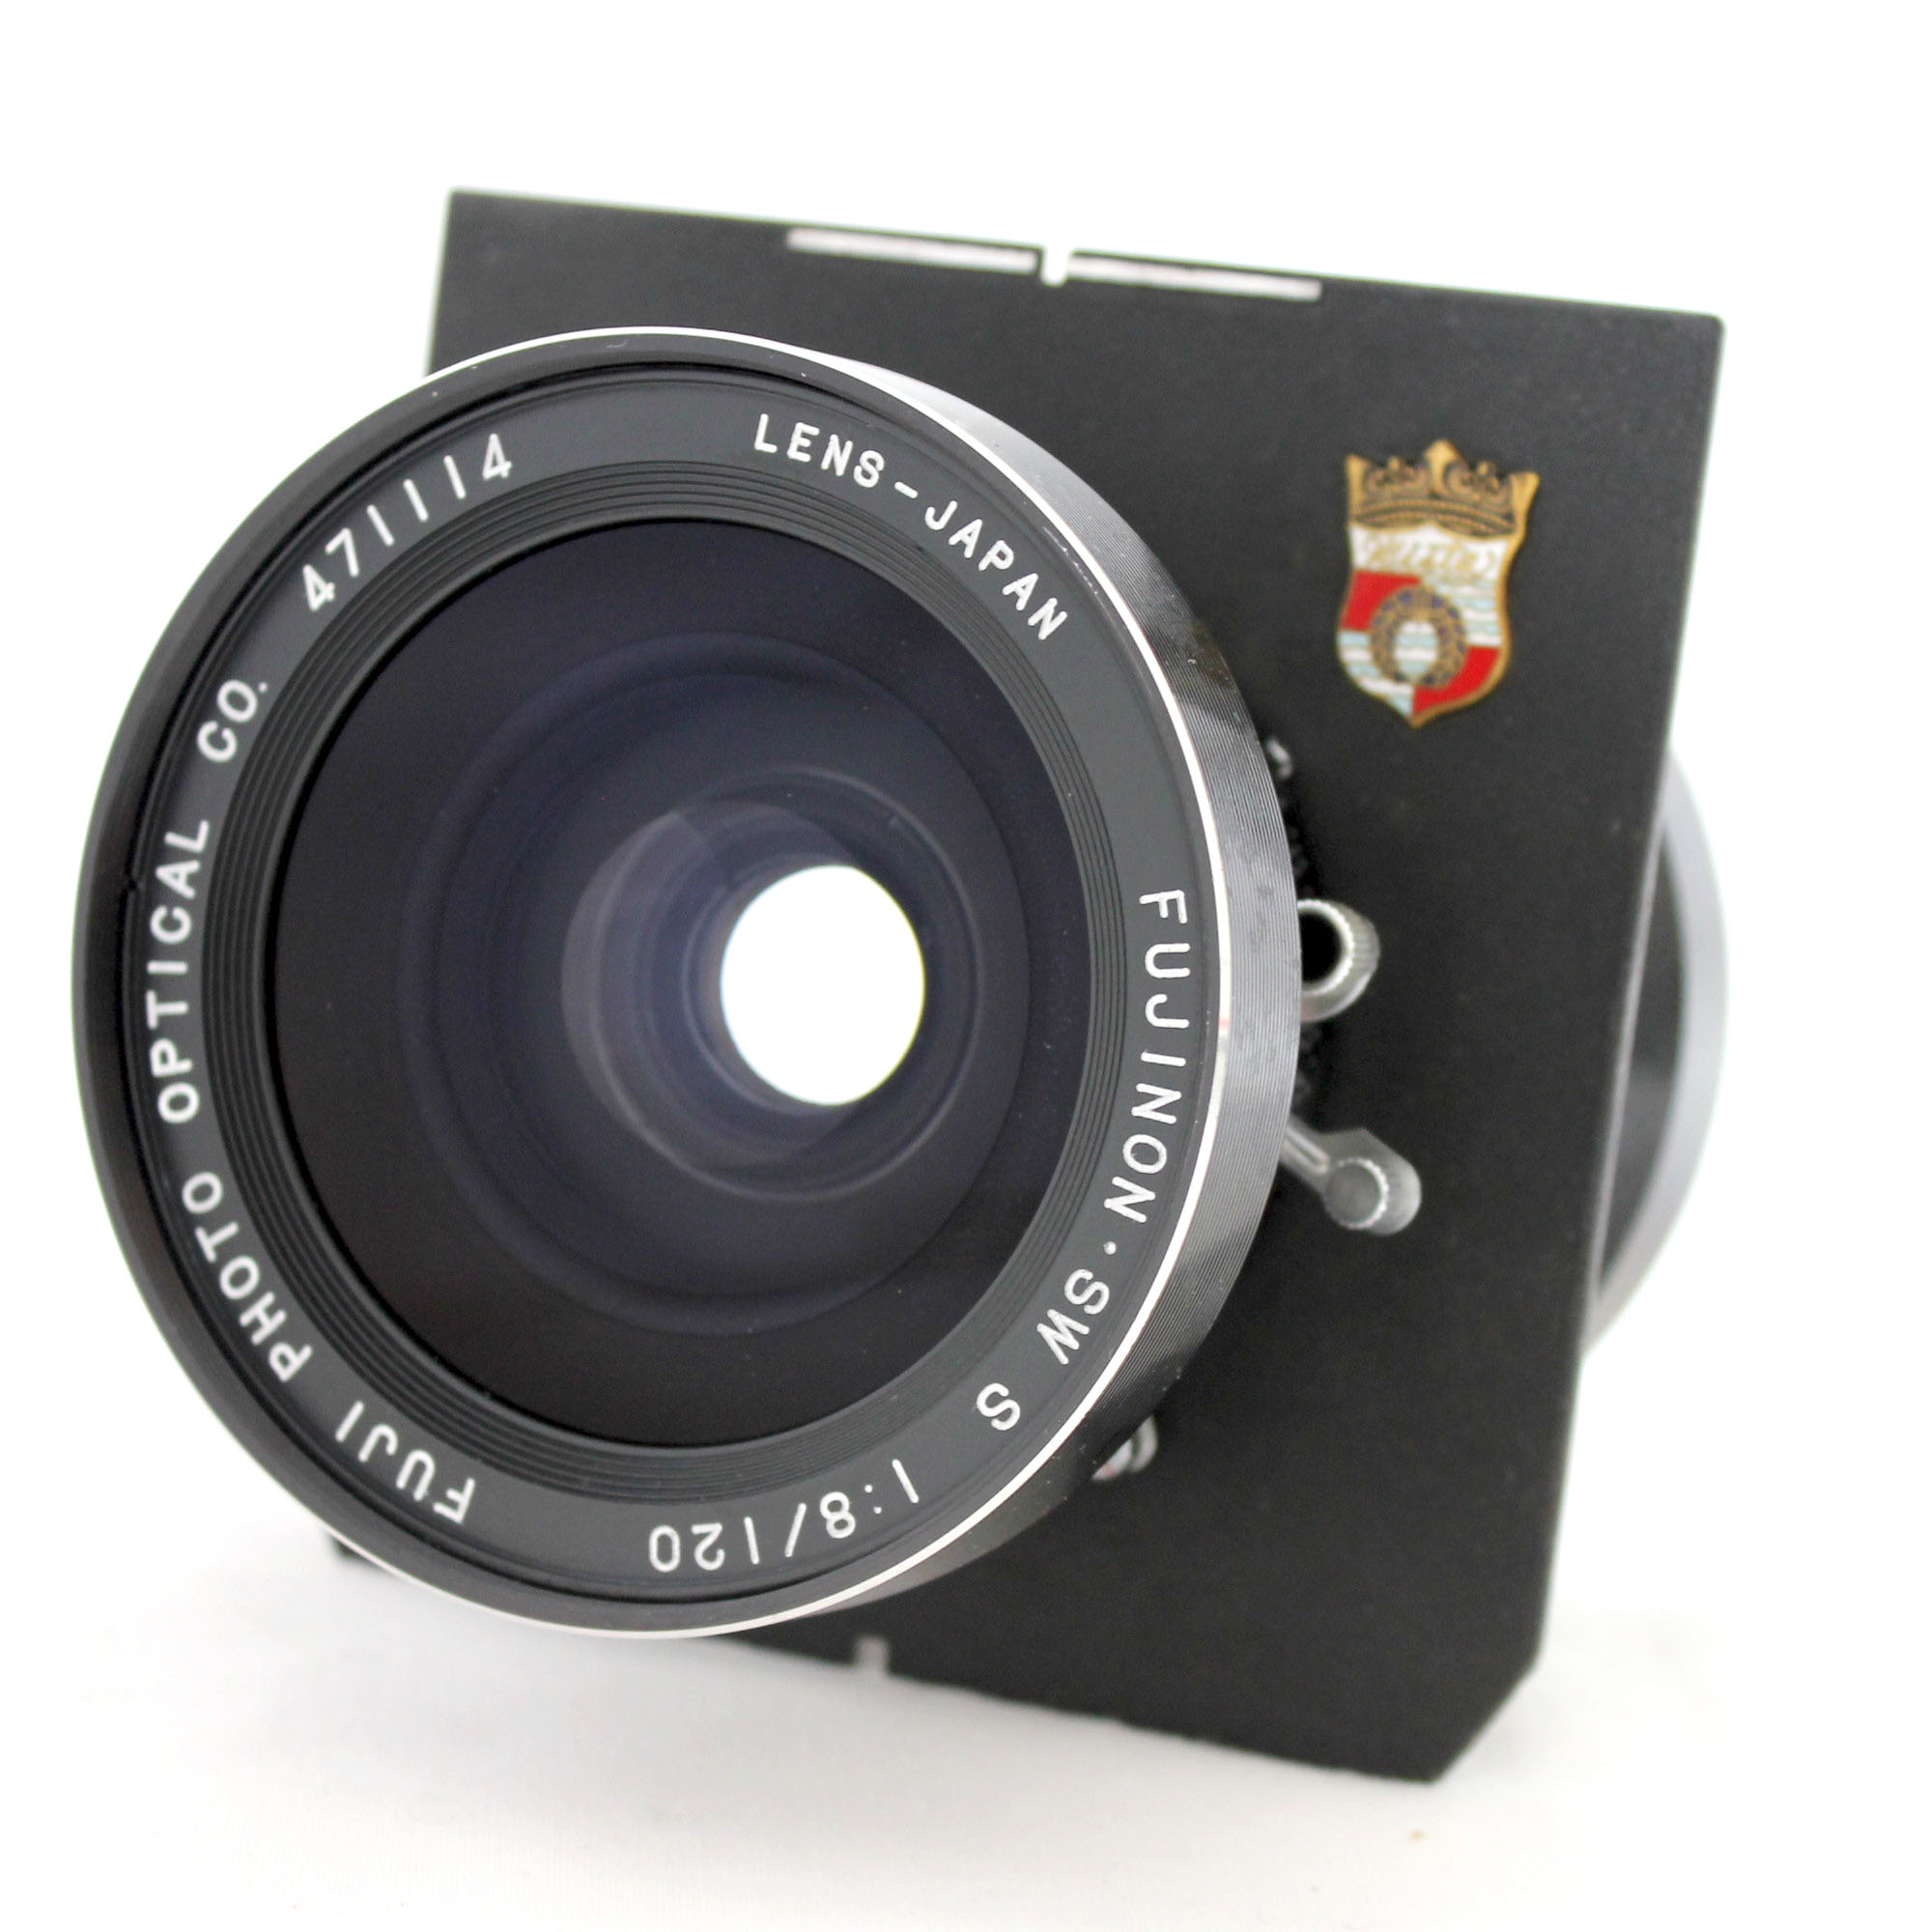 Japan Used Camera Shop | Fuji Fujinon  SW S 120mm F/8 Super Wide Angle Large Format Lens Seiko Shutter from Japan